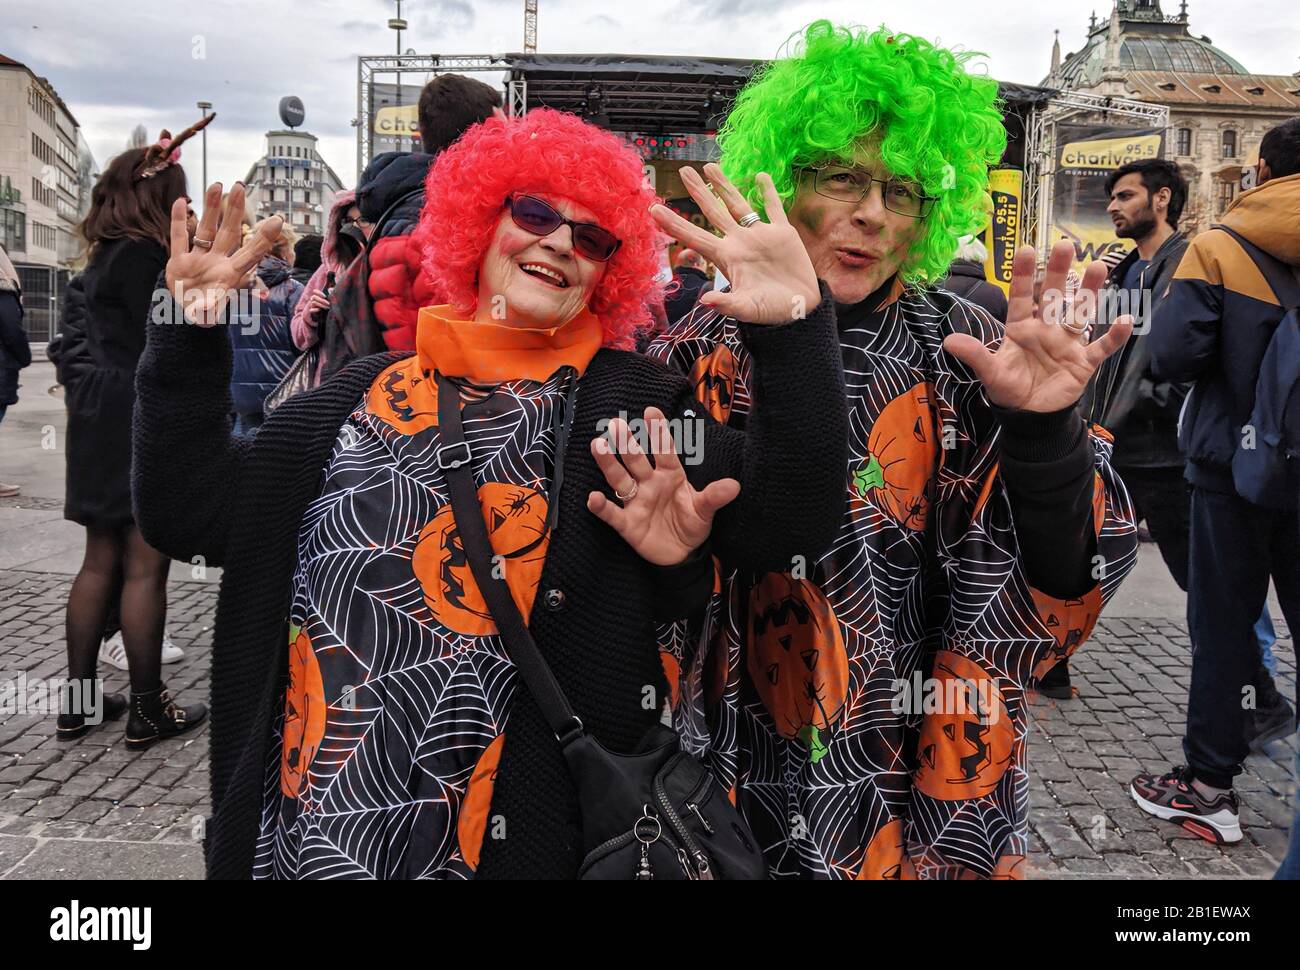 Munich, Bavaria, Germany. 25th Feb, 2020. Examples of the elaborate and  often outlandish and humorous costumes